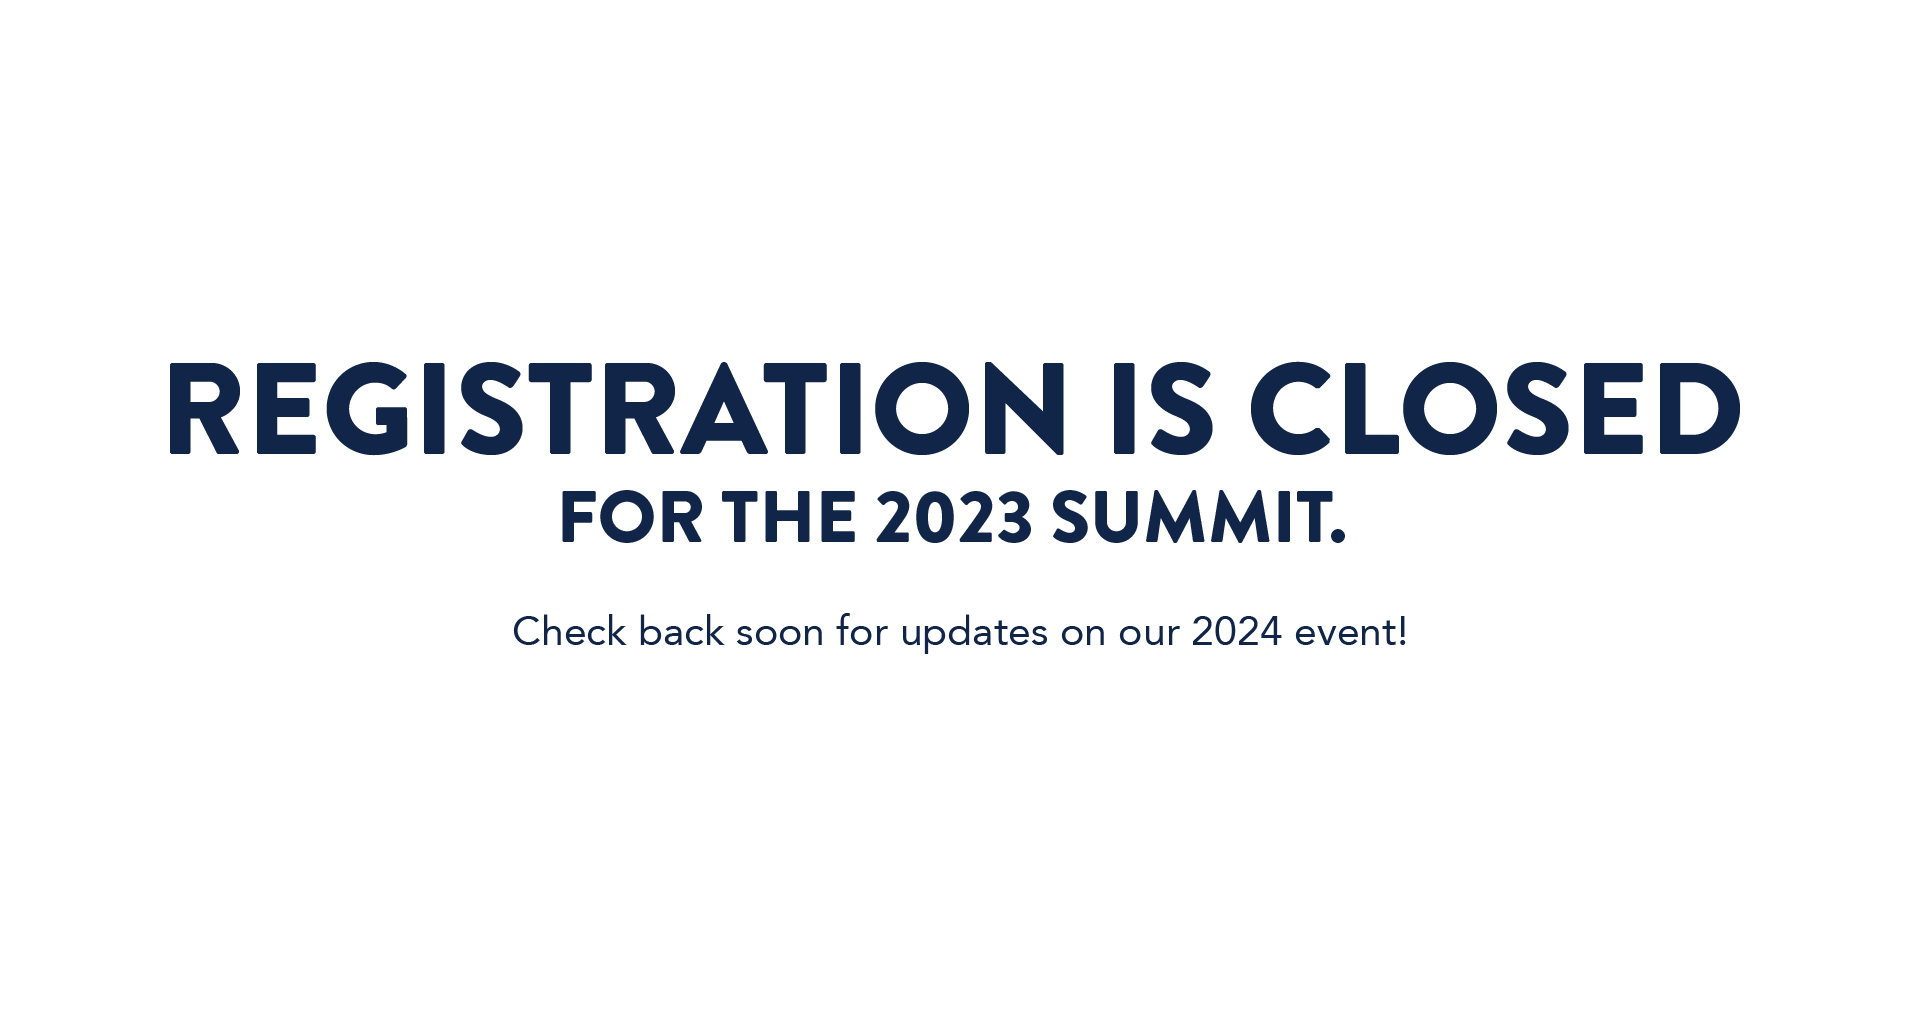 2023 Registration is Closed_1920px wide